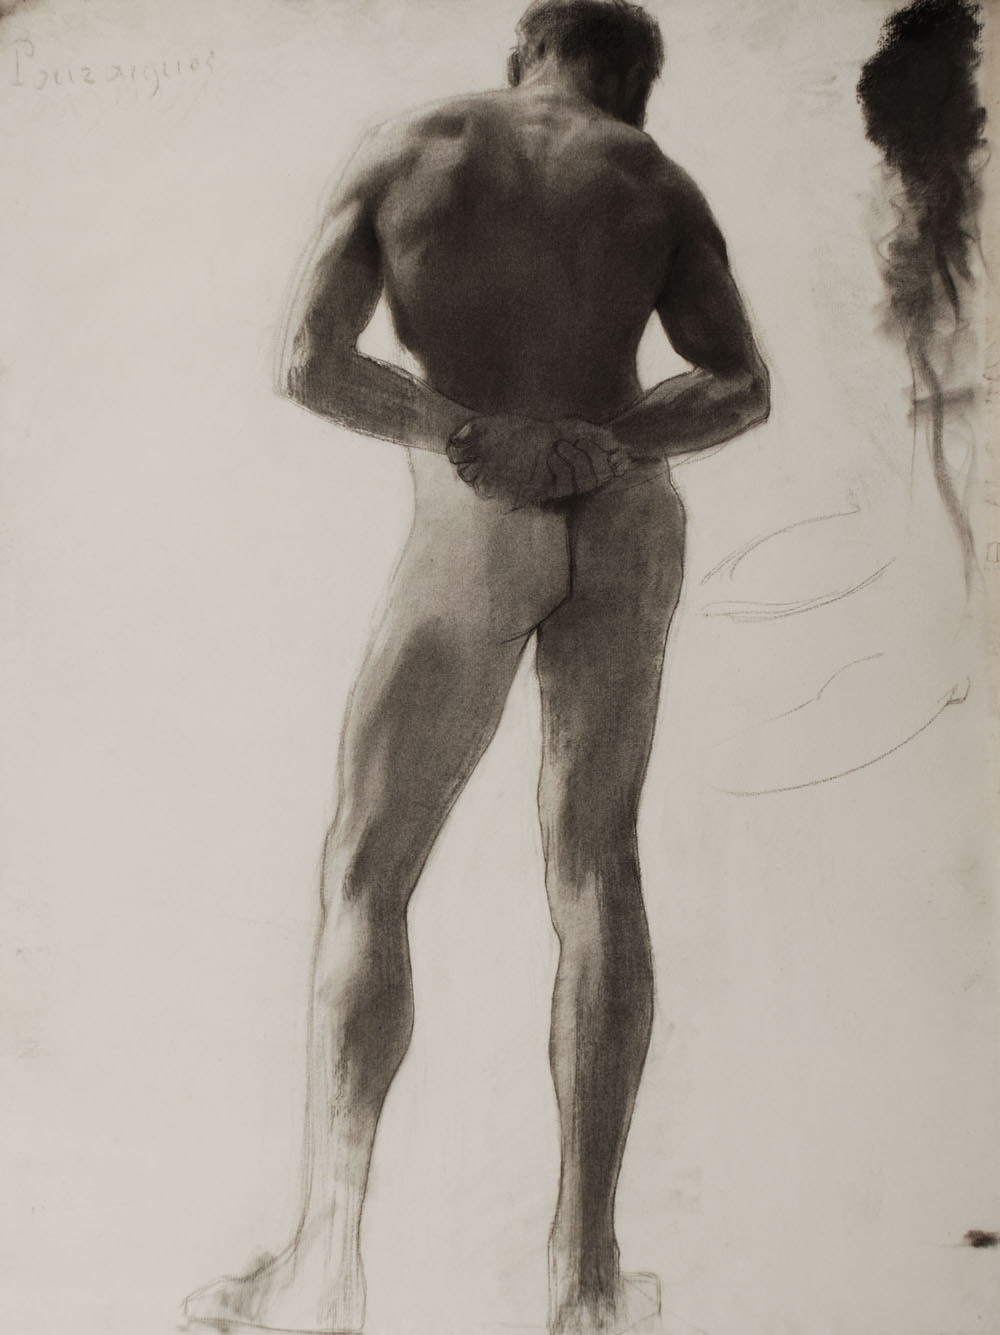 Lucien-Paul Pouzargues drawing standing male nude from behind